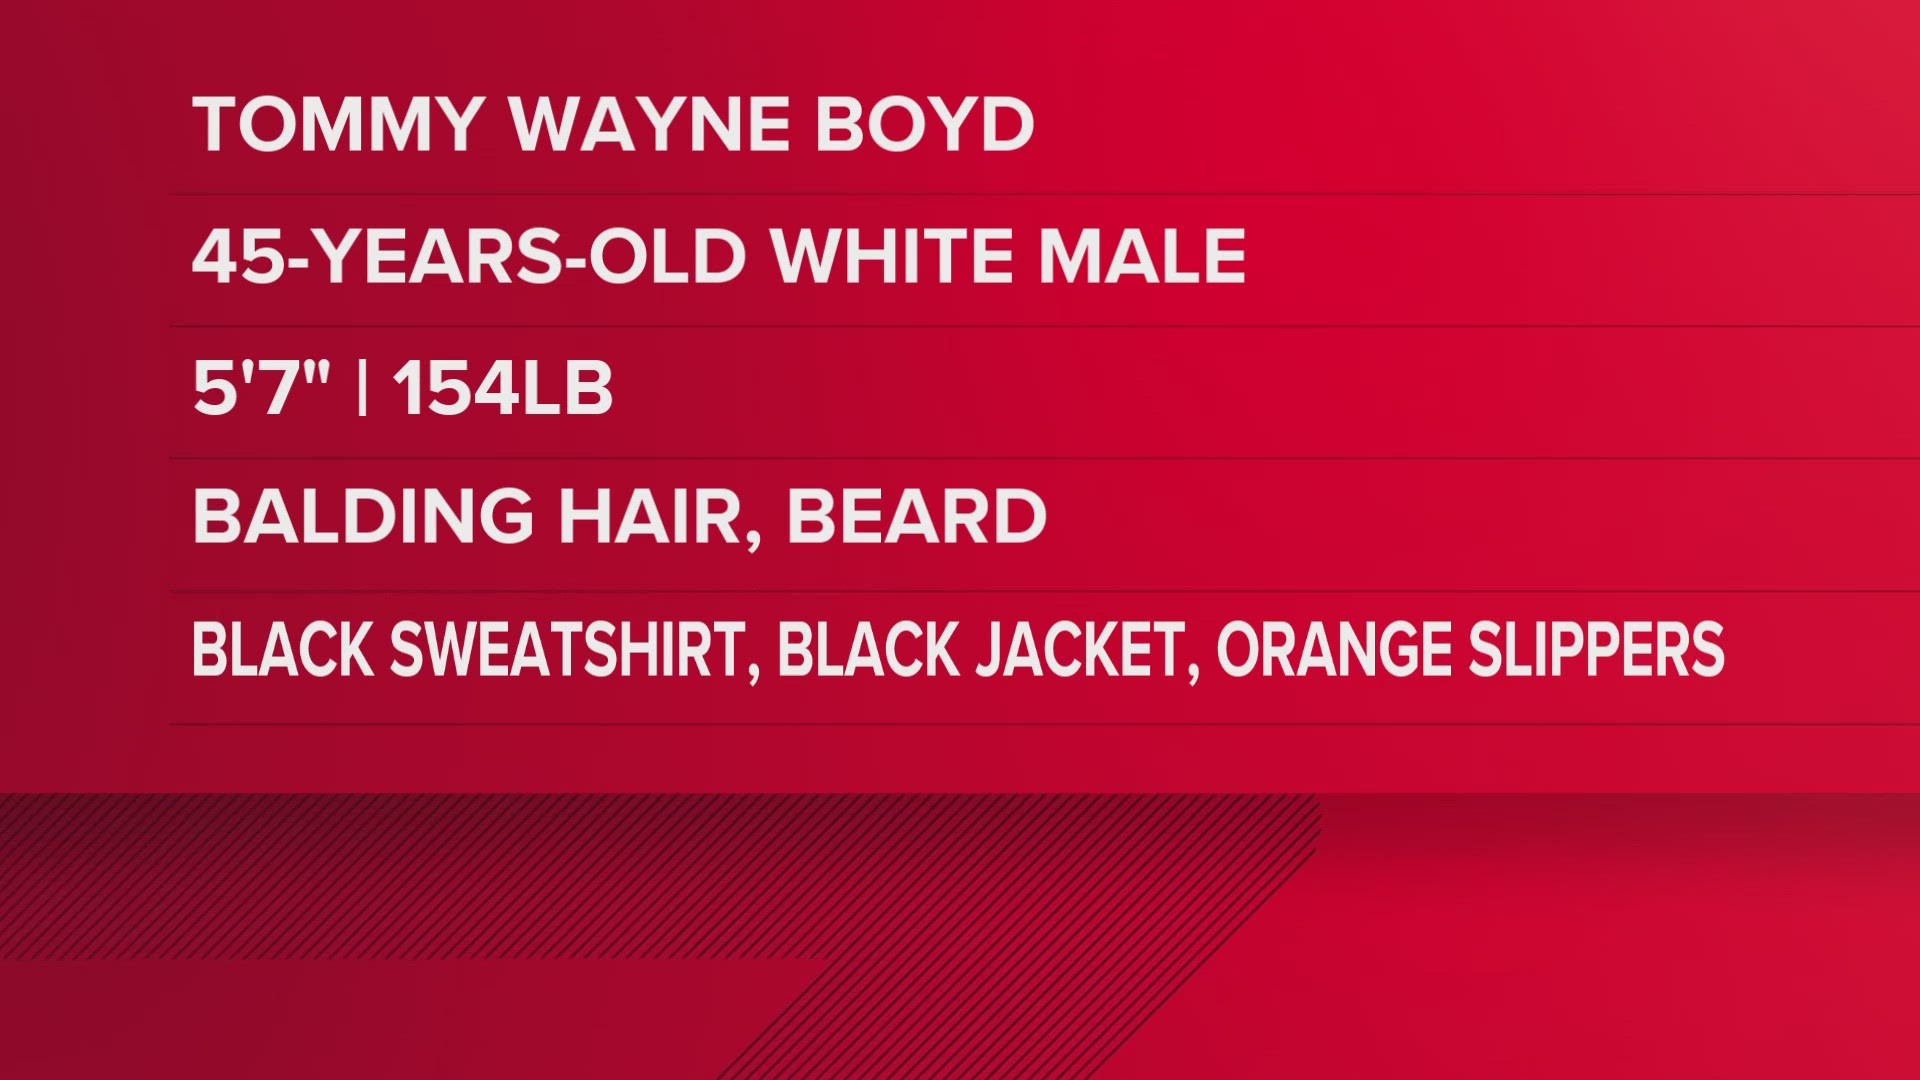 Call 911 immediately if you see Boyd. He was last seen at about 4:30 a.m. Thursday.